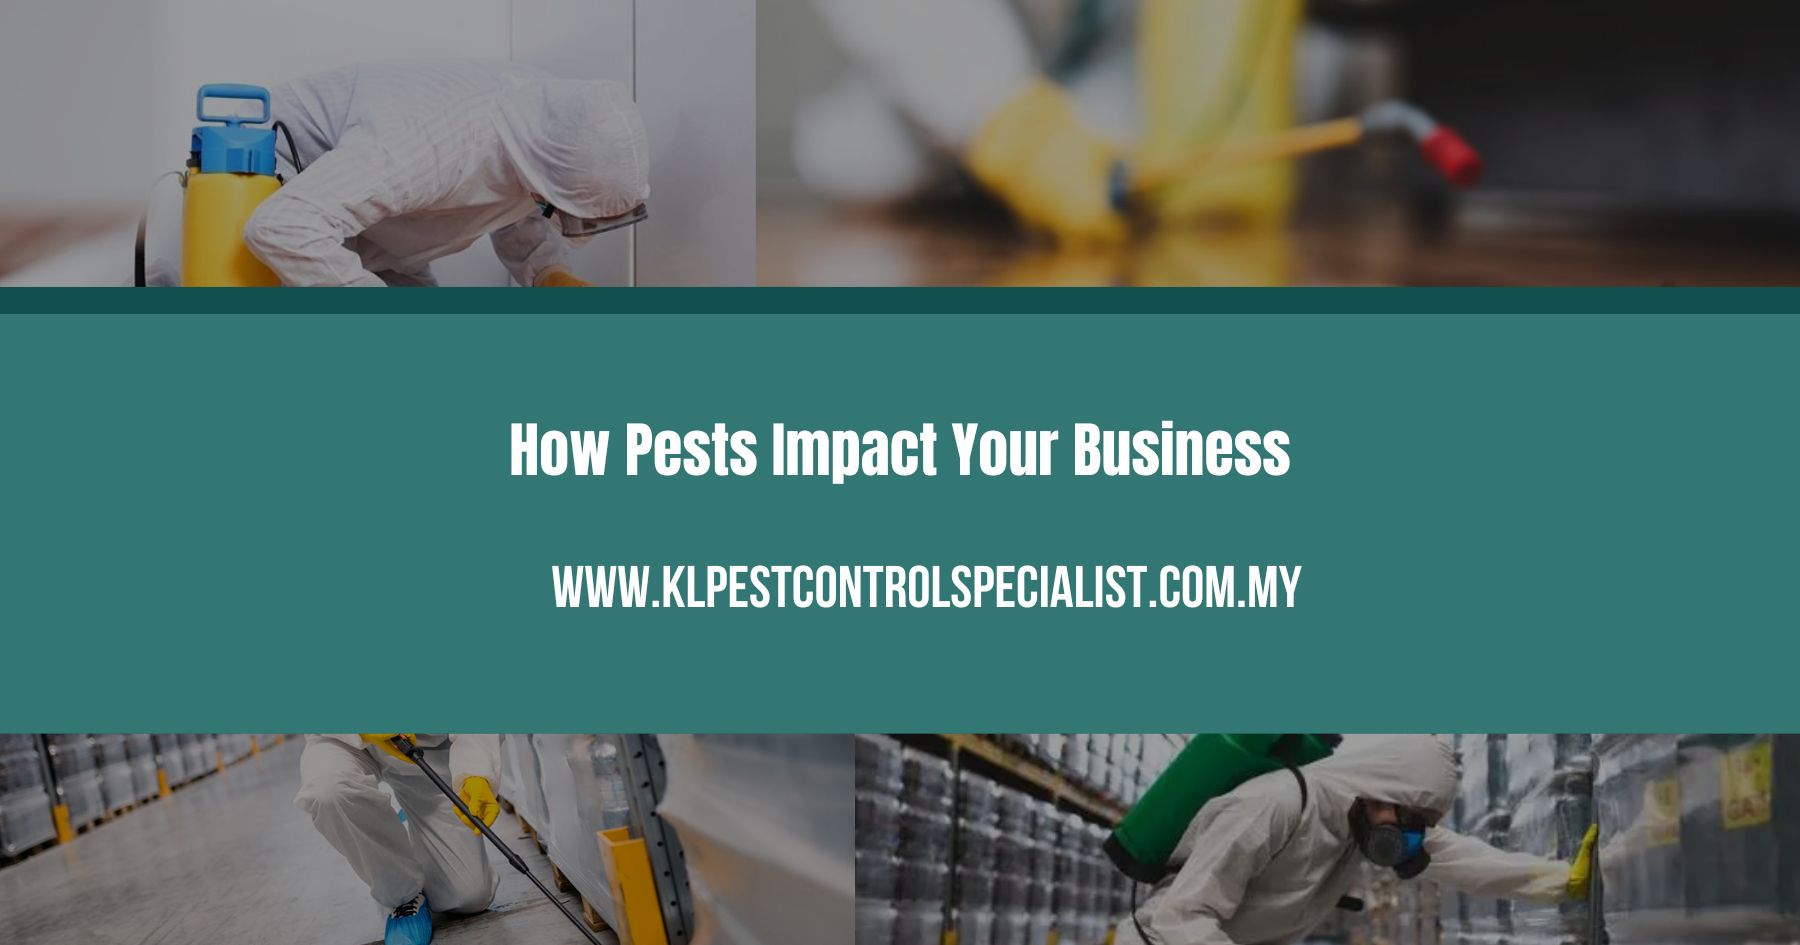 How Pests Impact Your Business